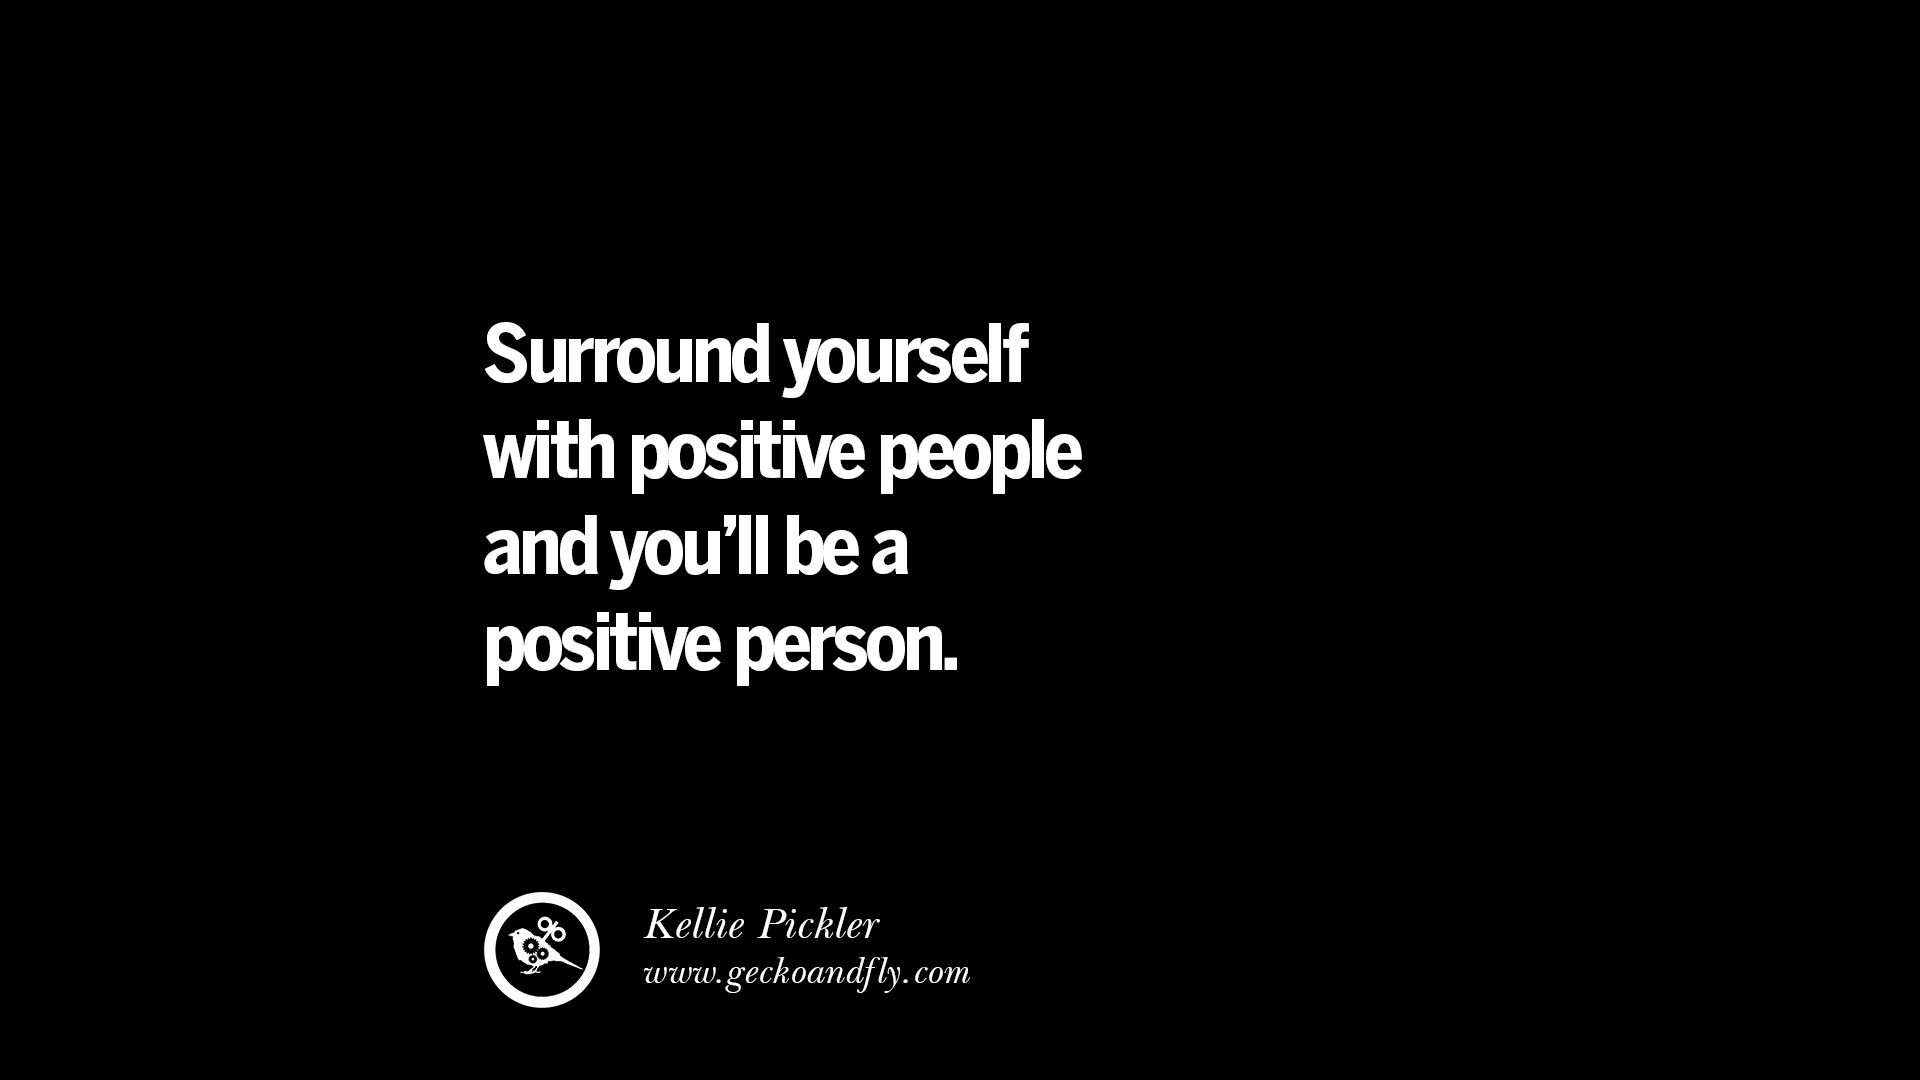 Surround Yourself With Positive Energy Quotes
 20 Inspirational Quotes Positive Thinking Power And